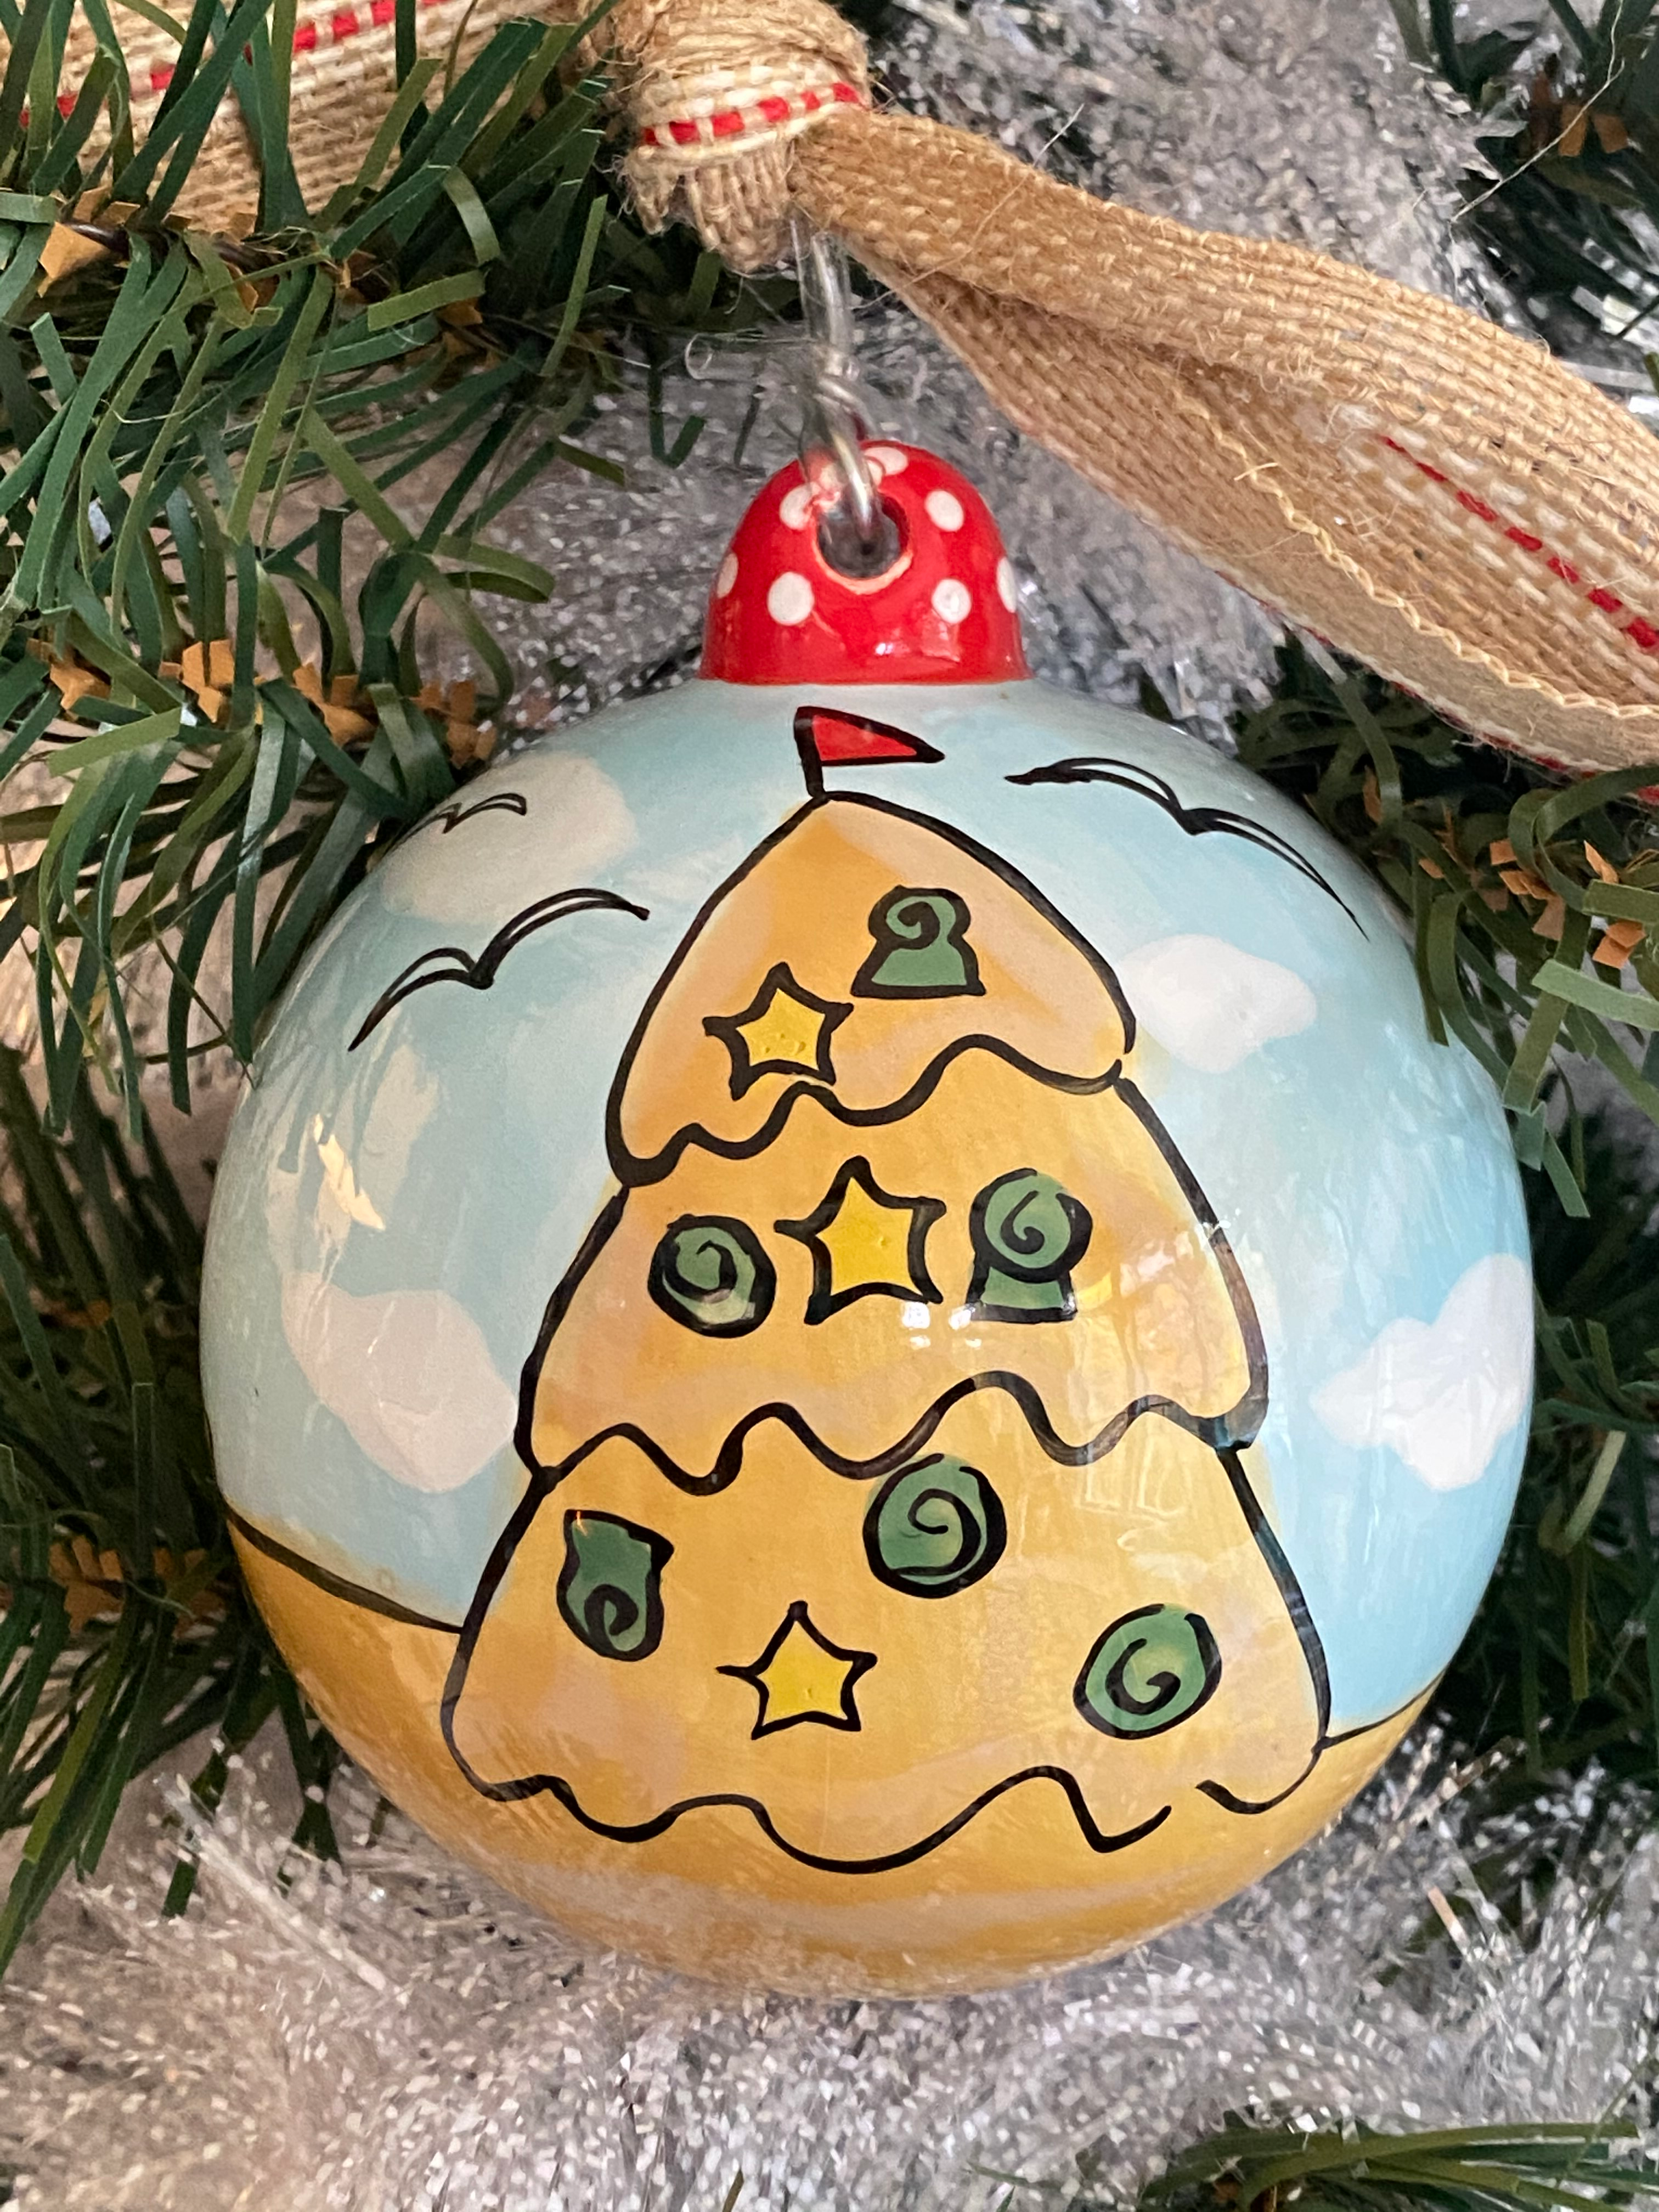 Sand Castle Holiday Ornament